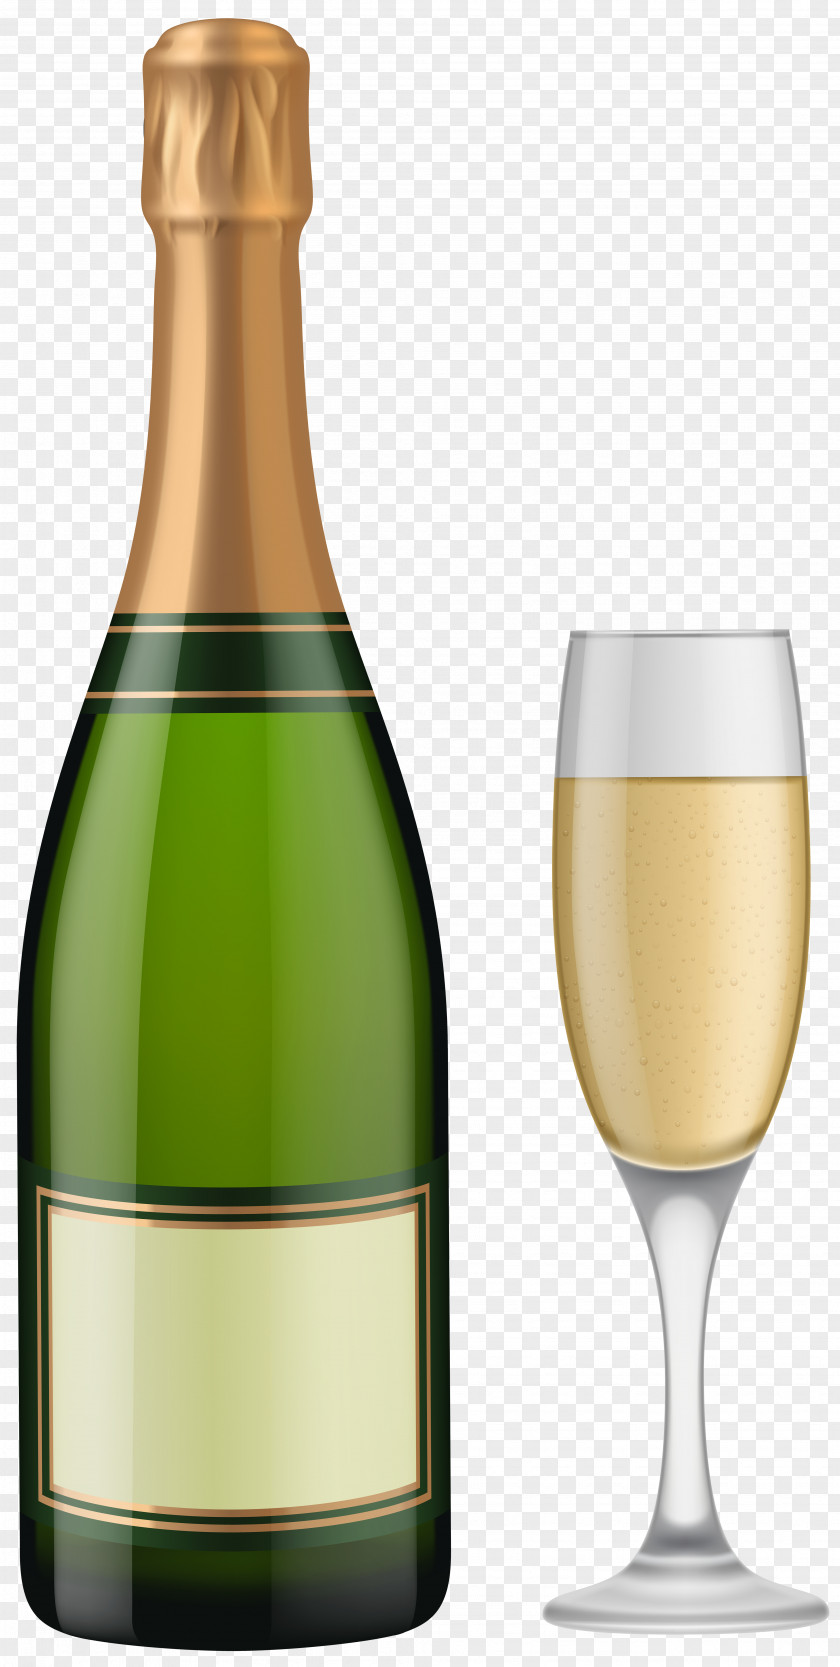 Champagne Glass Sparkling Wine Bottle PNG